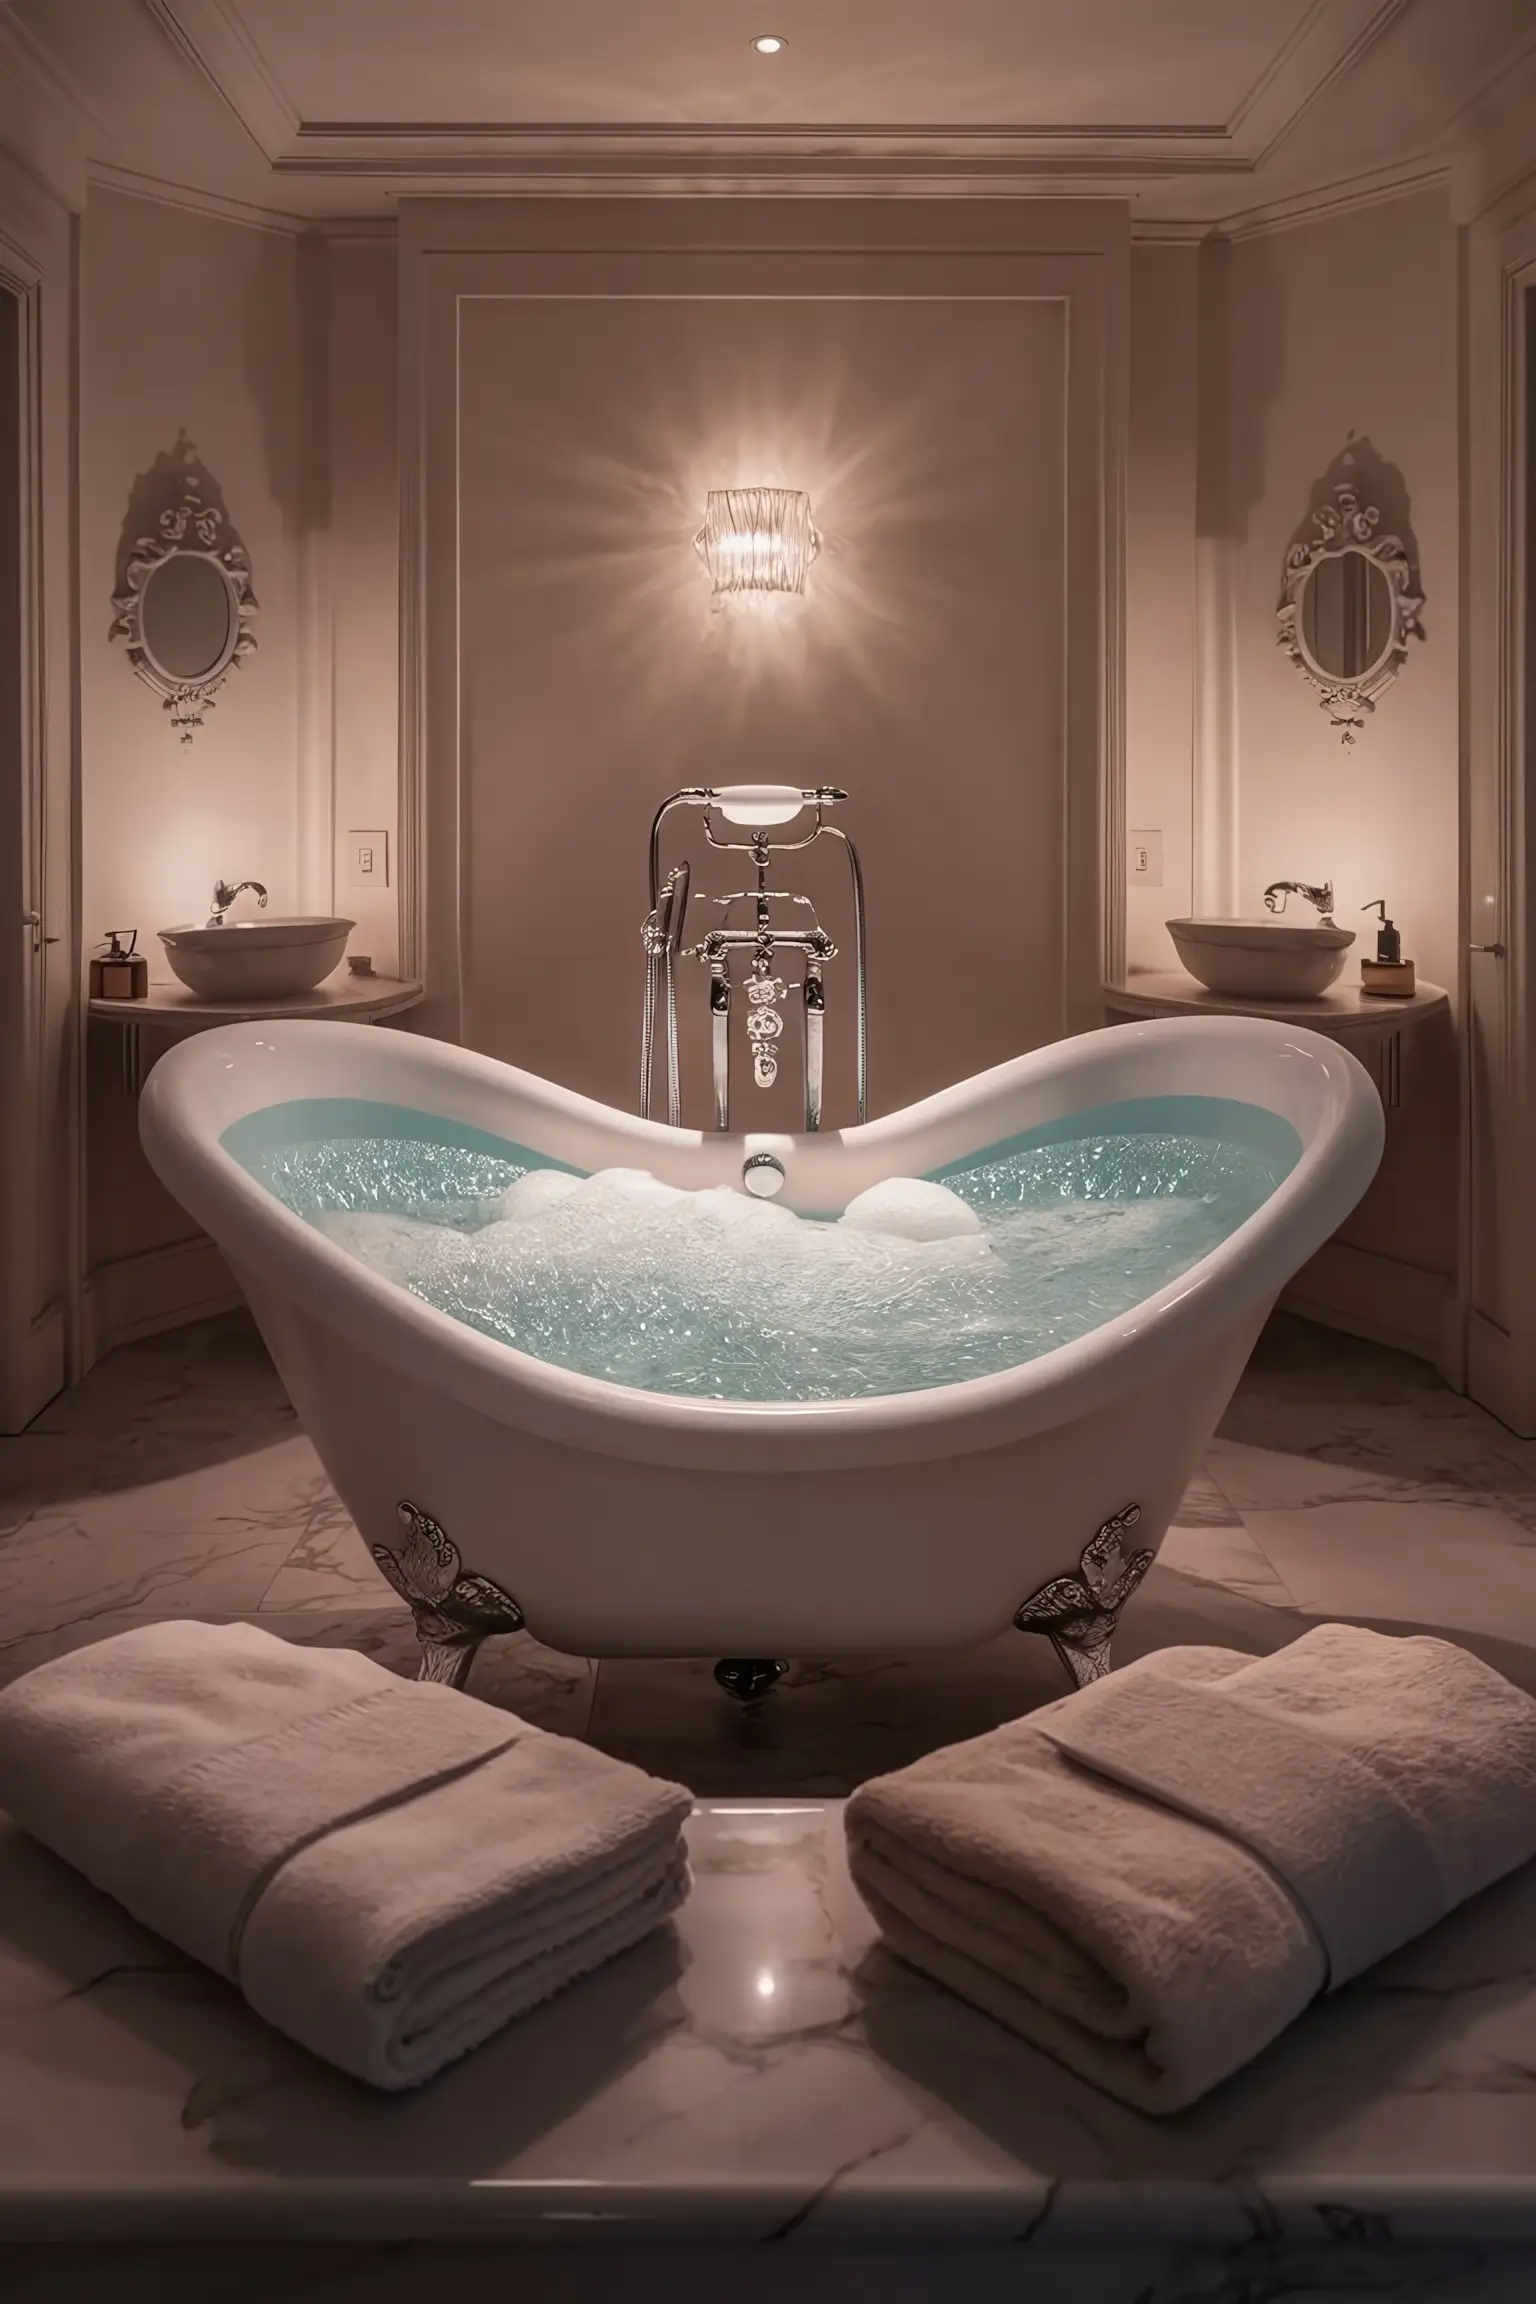 Luxurious bathroom with a standalone tub, soft lighting, and elegant decor.